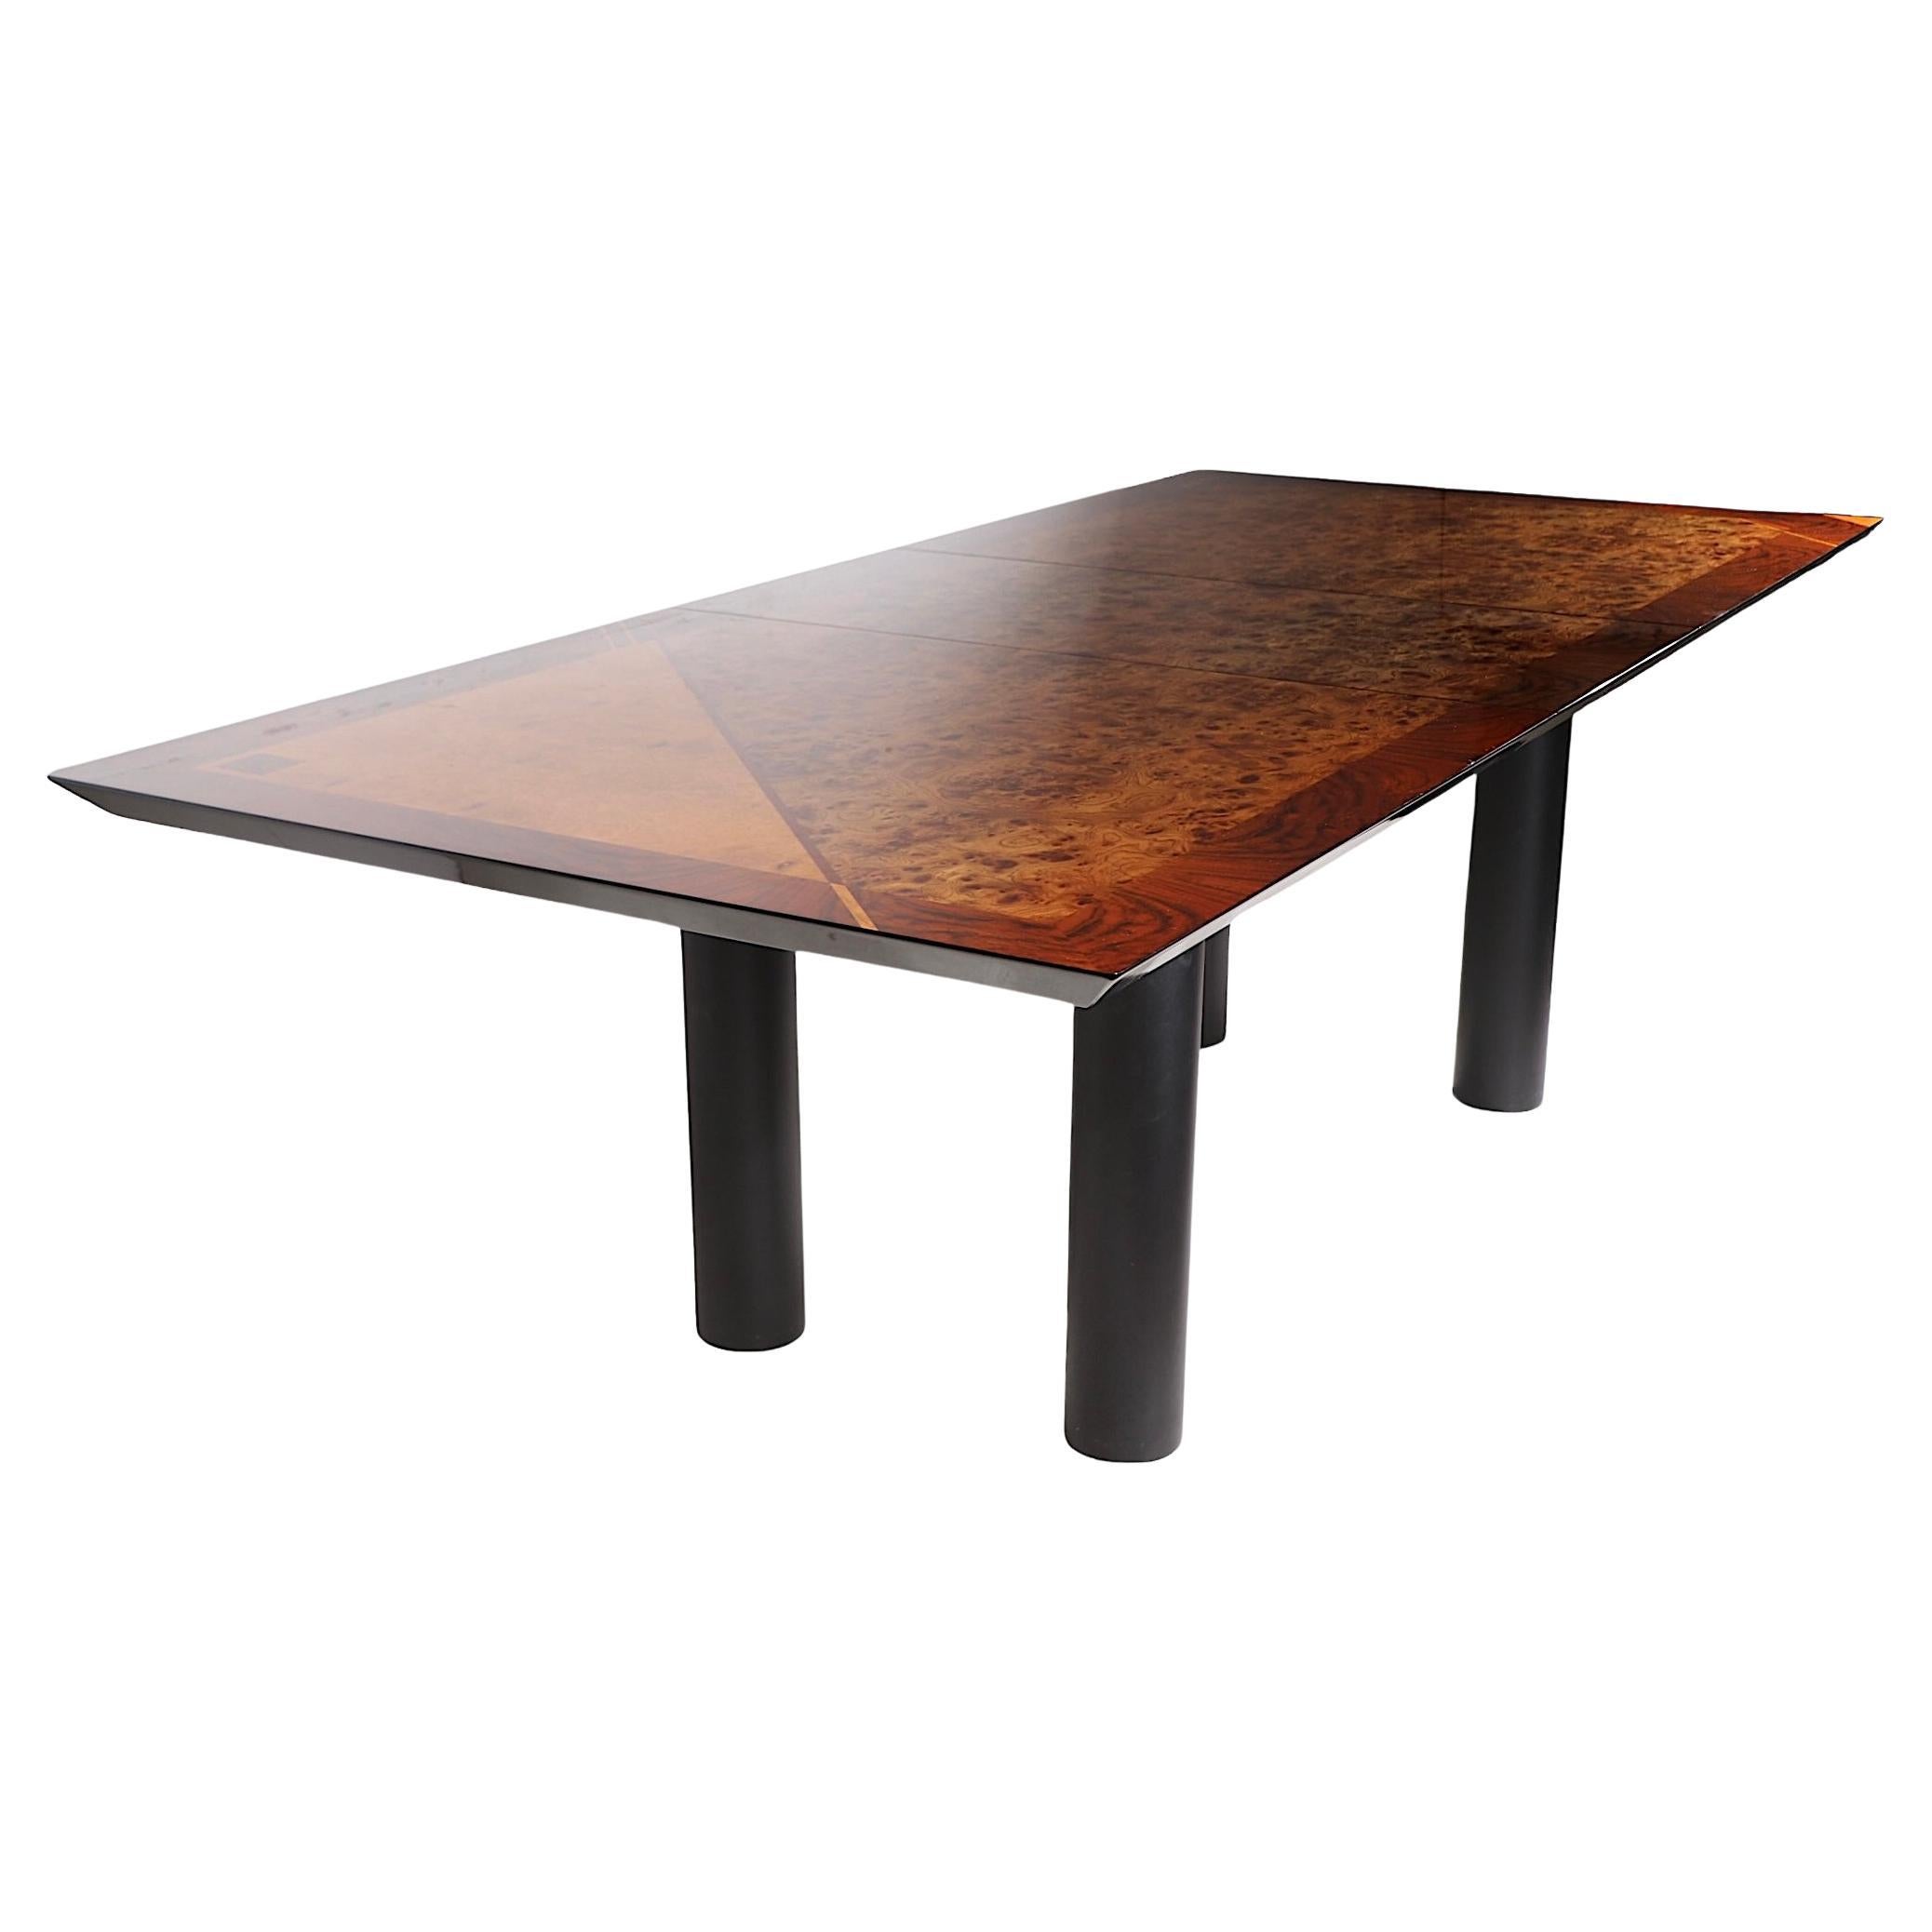 Italian Post Modern Dining Table by Oscar Dell Arredamento for Miniforms c 1970s For Sale